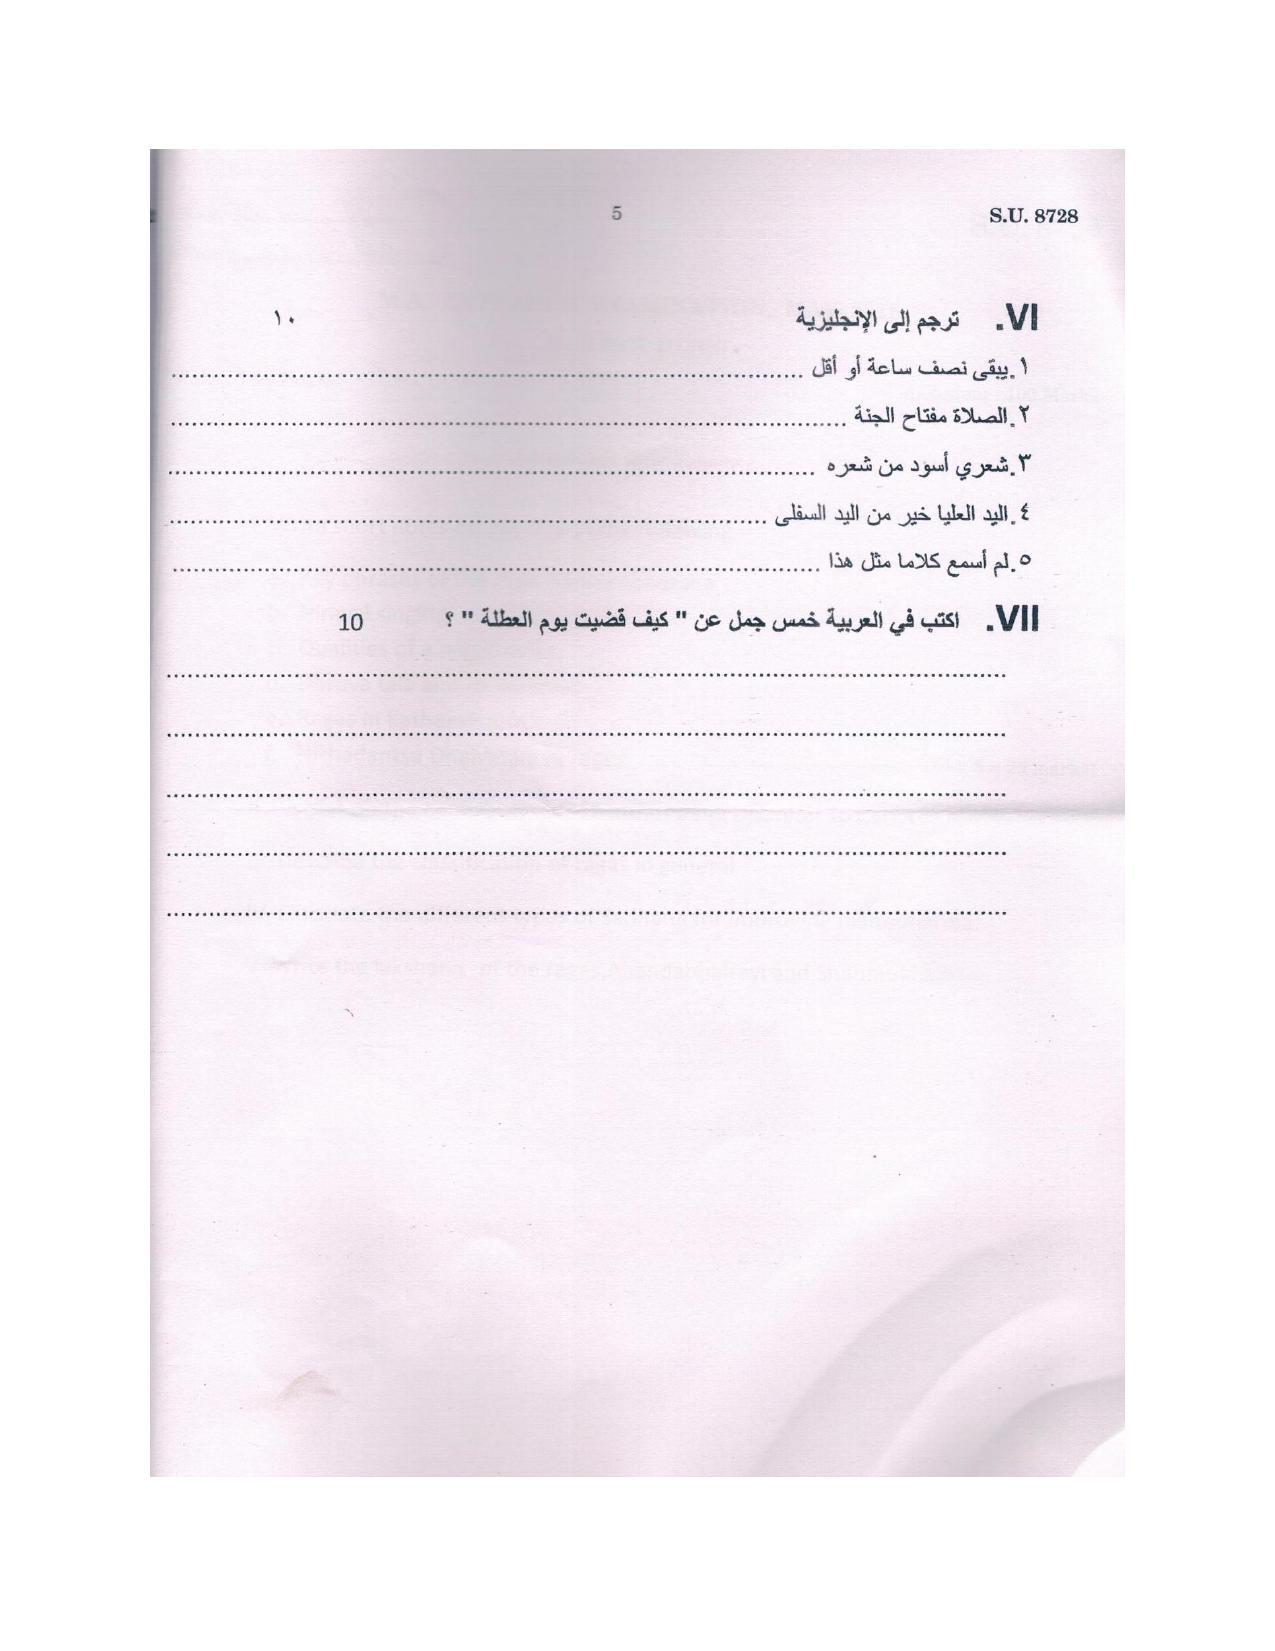 SSUS Entrance Exam ARABIC 2018 Question Paper - Page 5